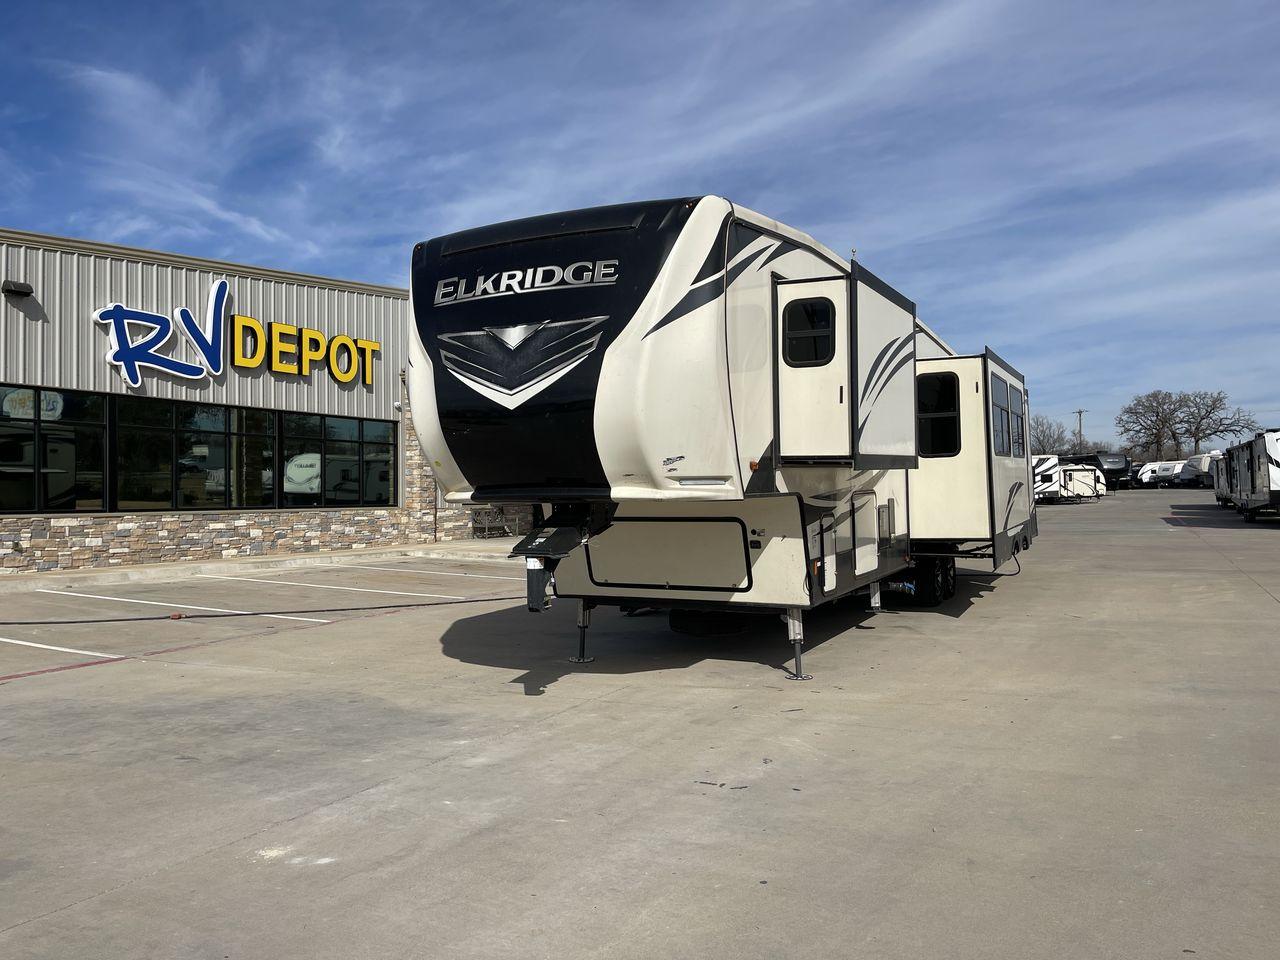 2020 BEIGE HEARTLAND ELKRIDGE 38RSRT (5SFRG4228LE) , Length: 41.75 ft. | Dry Weight: 13,450 lbs. | Gross Weight: 15,500 lbs. | Slides: 5 transmission, located at 4319 N Main St, Cleburne, TX, 76033, (817) 678-5133, 32.385960, -97.391212 - This 2020 Heartland ElkRidge 38RSRT is a dual-axle aluminum wheel setup measuring 41.75 ft. in length and 13.25 ft. in height. It has a dry weight of 13,450 lbs. and a GVWR of 15,500 lbs. It also comes equipped with automatic heating and cooling rated at 35,000 and 15,000 BTUs respectively. This fif - Photo #0